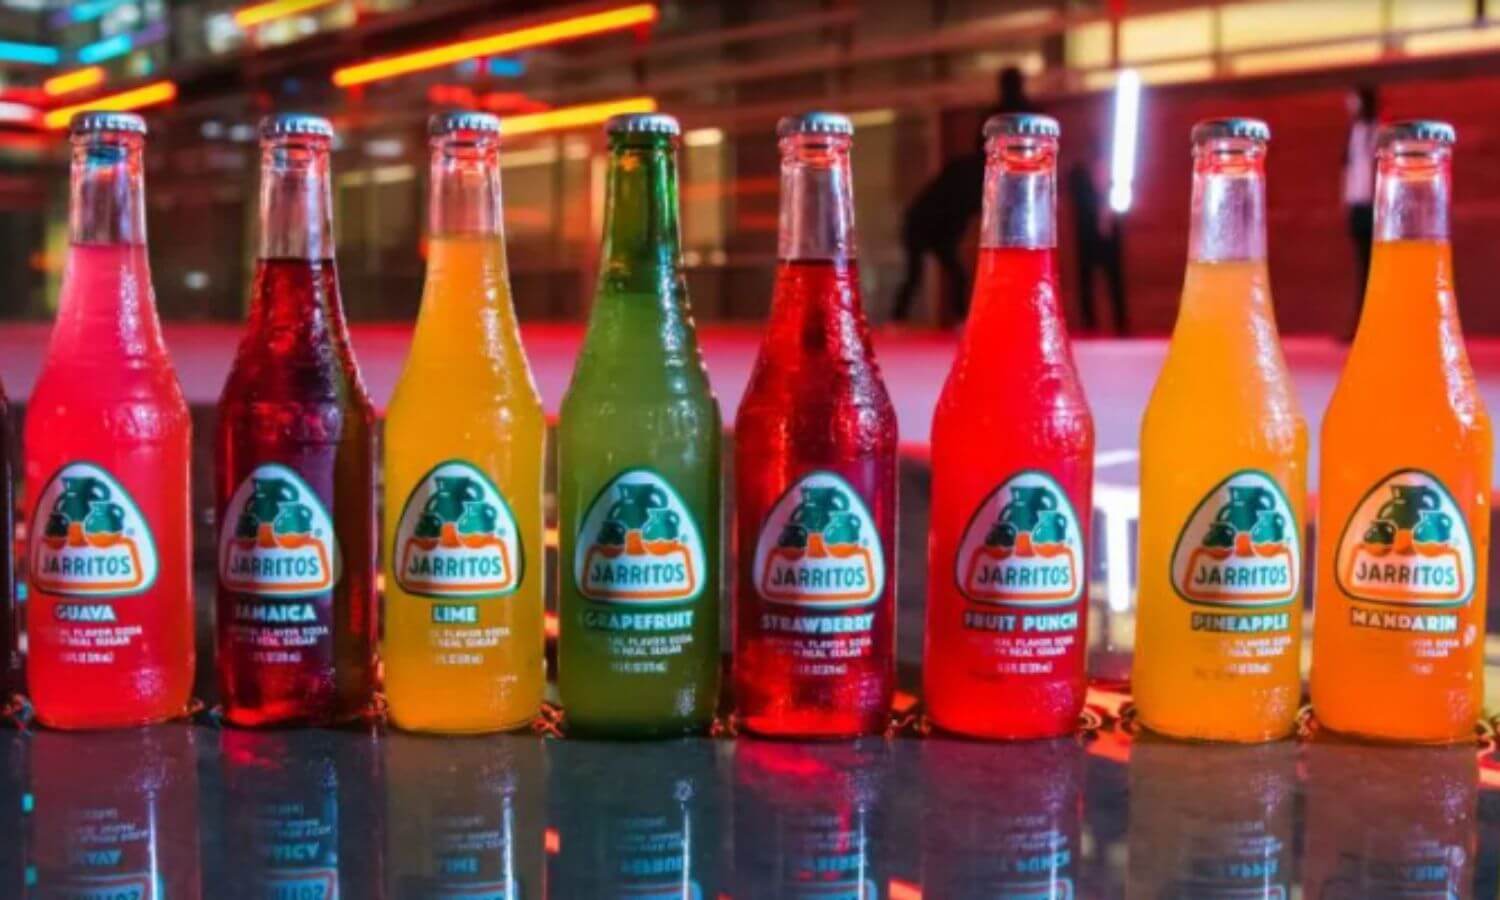 The different flavors of Jarritos, Mexican sodas.